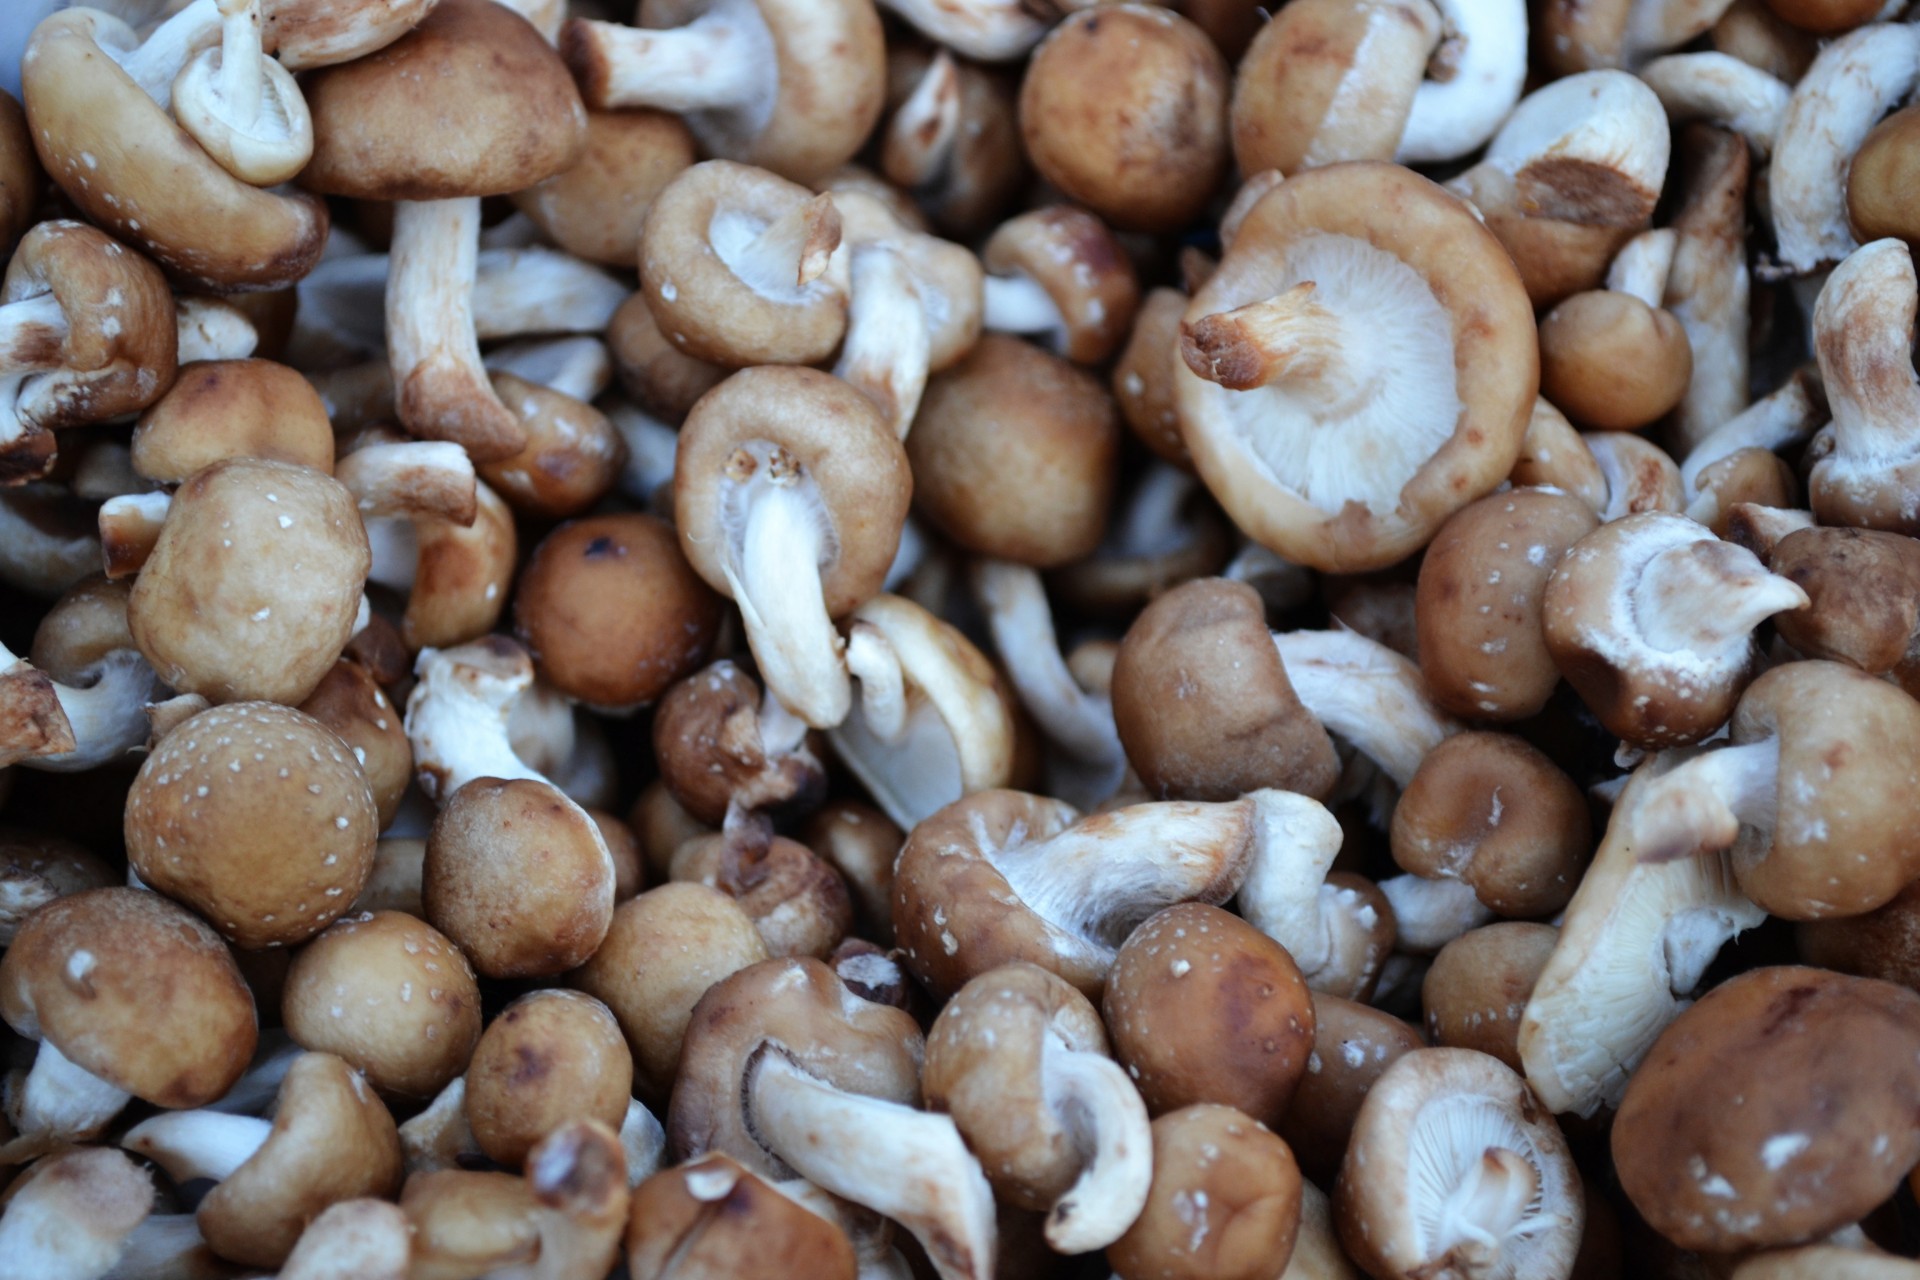 Many brown and white mushrooms fill the entire image. They are small but vary a bit in size.